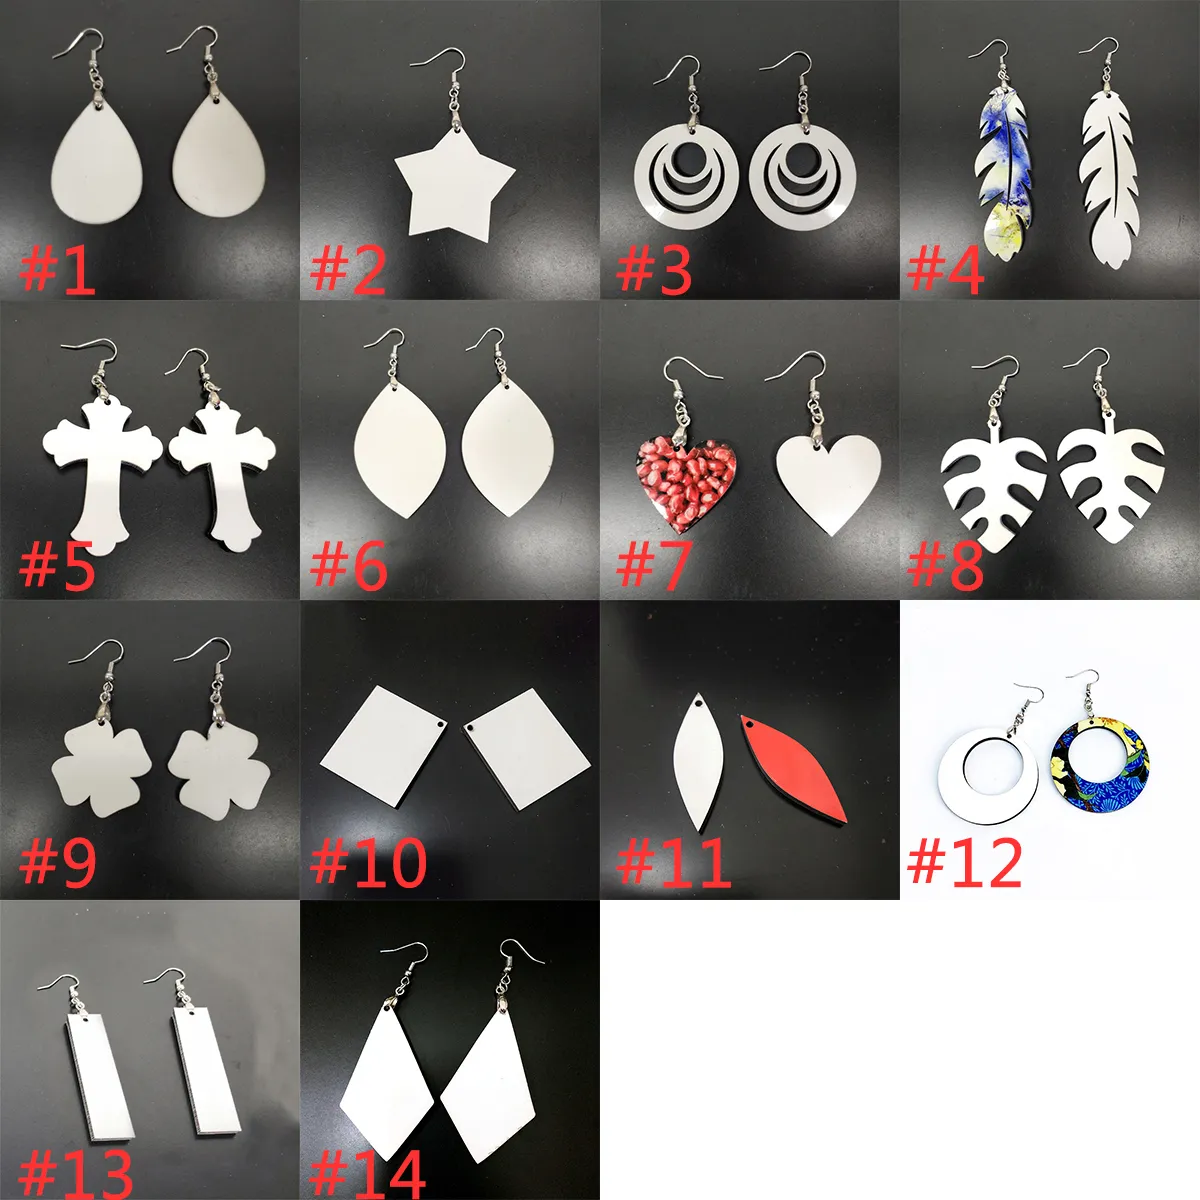 Sublimation Earrings Blank White Pendants Drop DIY Dangler Leaf Manual Handwork For Valentines Day Gifts w-00566